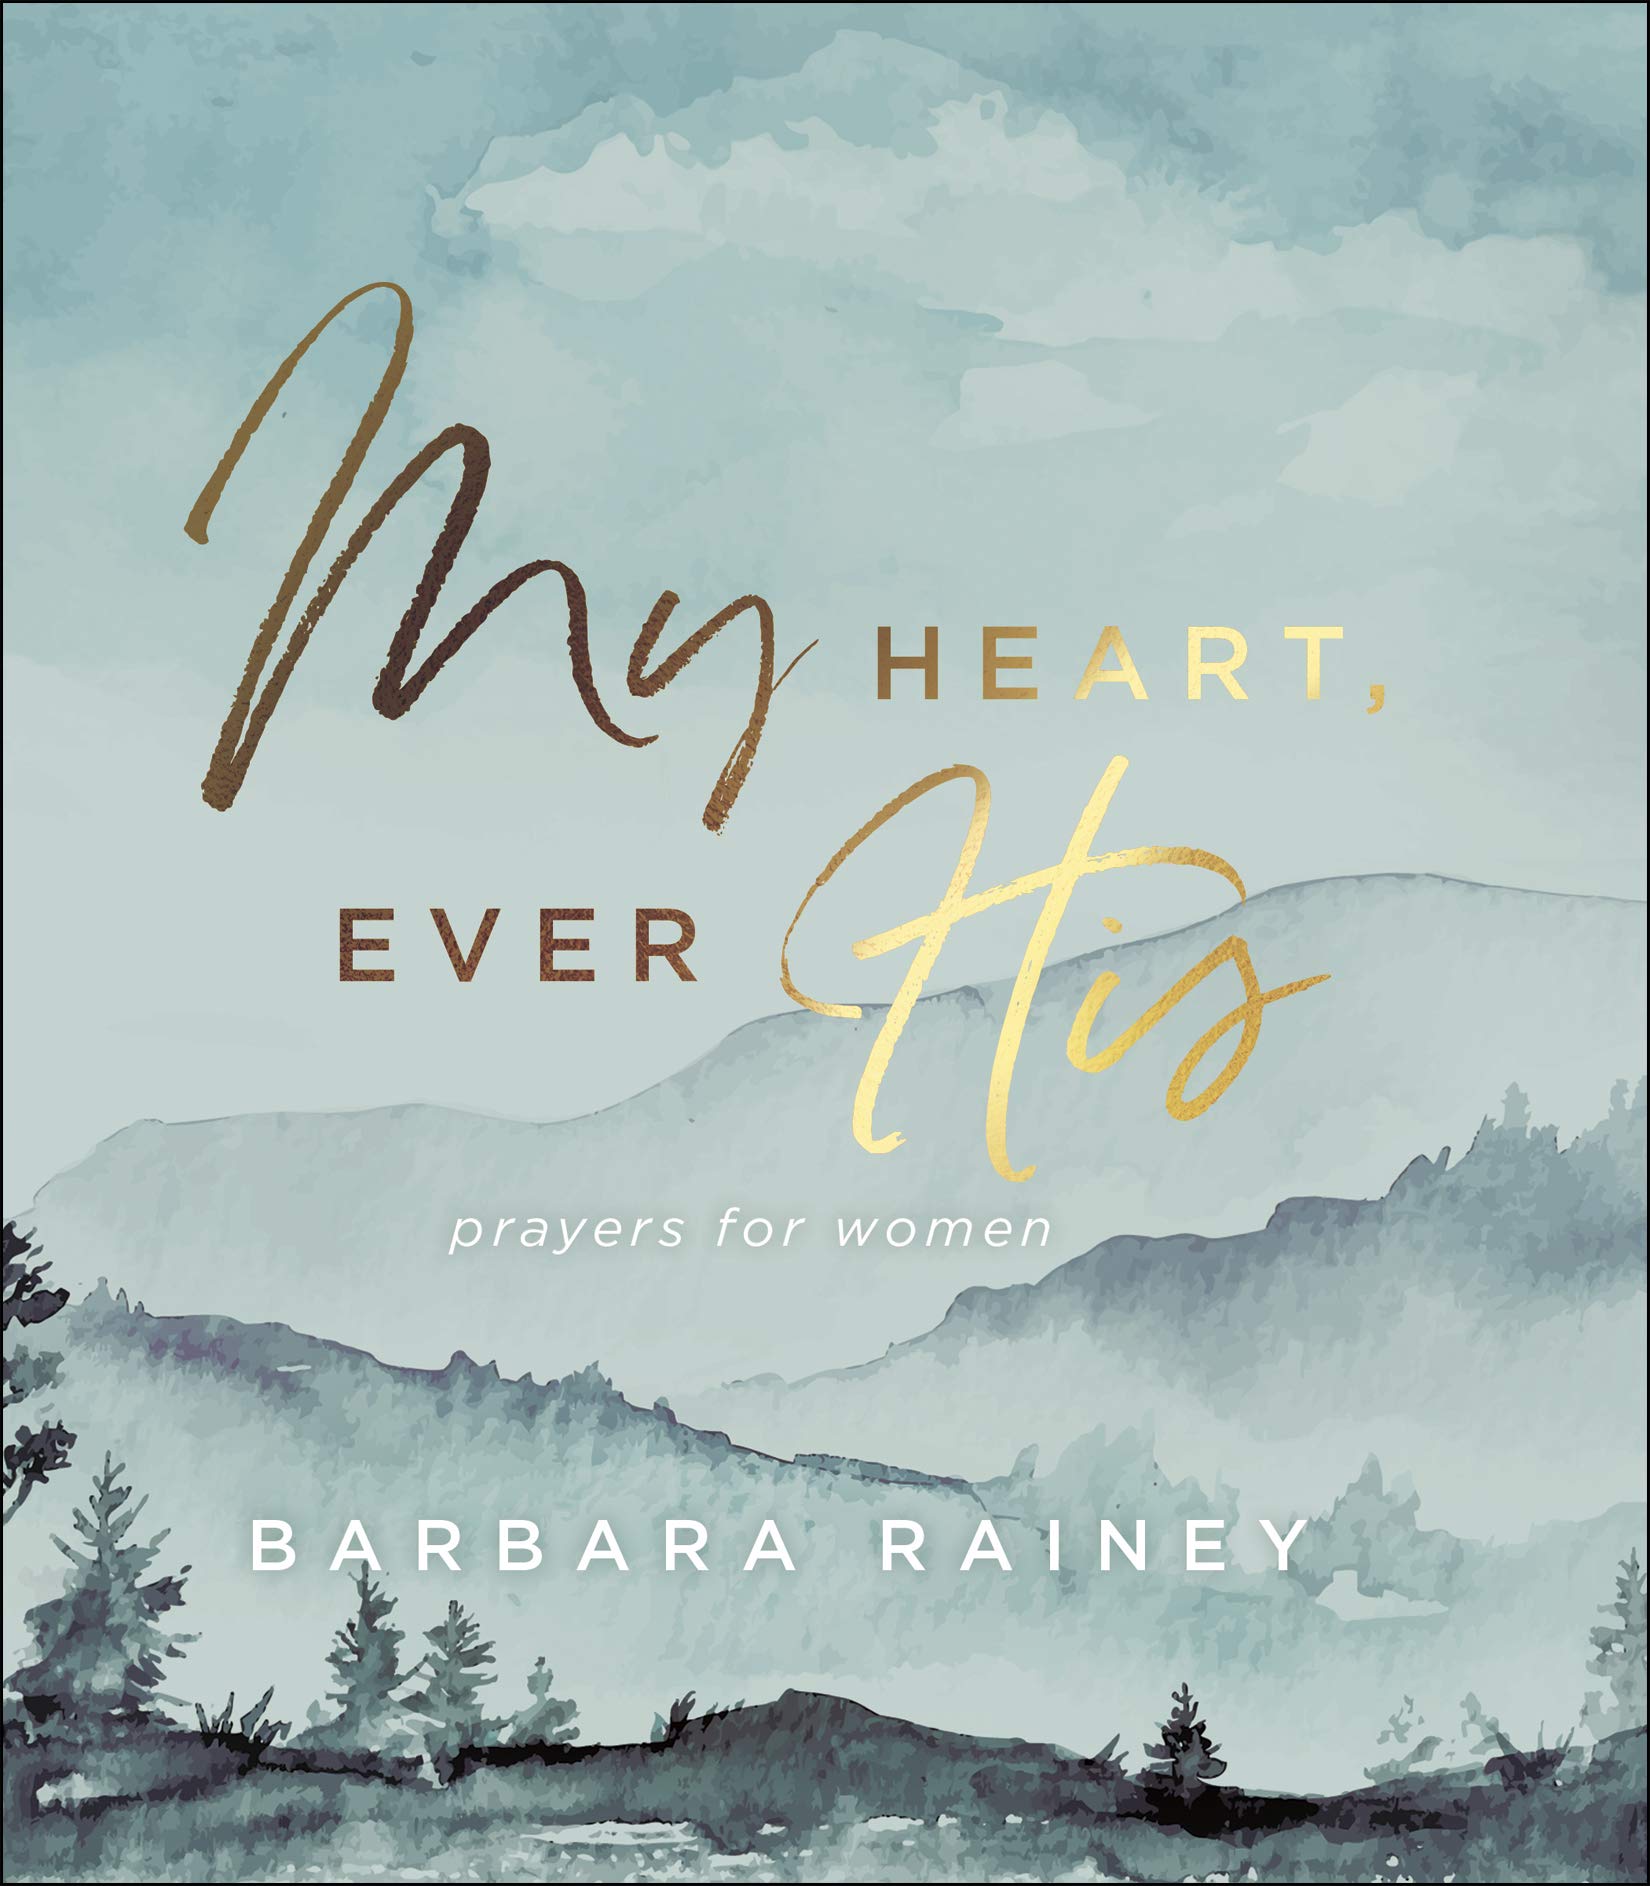 ROCKONLINE | New Creation Church | NCC | Joseph Prince | ROCK Bookshop | ROCK Bookstore | Star Vista | My Heart, Ever His: Prayers for Women, Hardcover | Barbara Rainey | Bethany House | Devotional | Free delivery for Singapore Orders above $50.